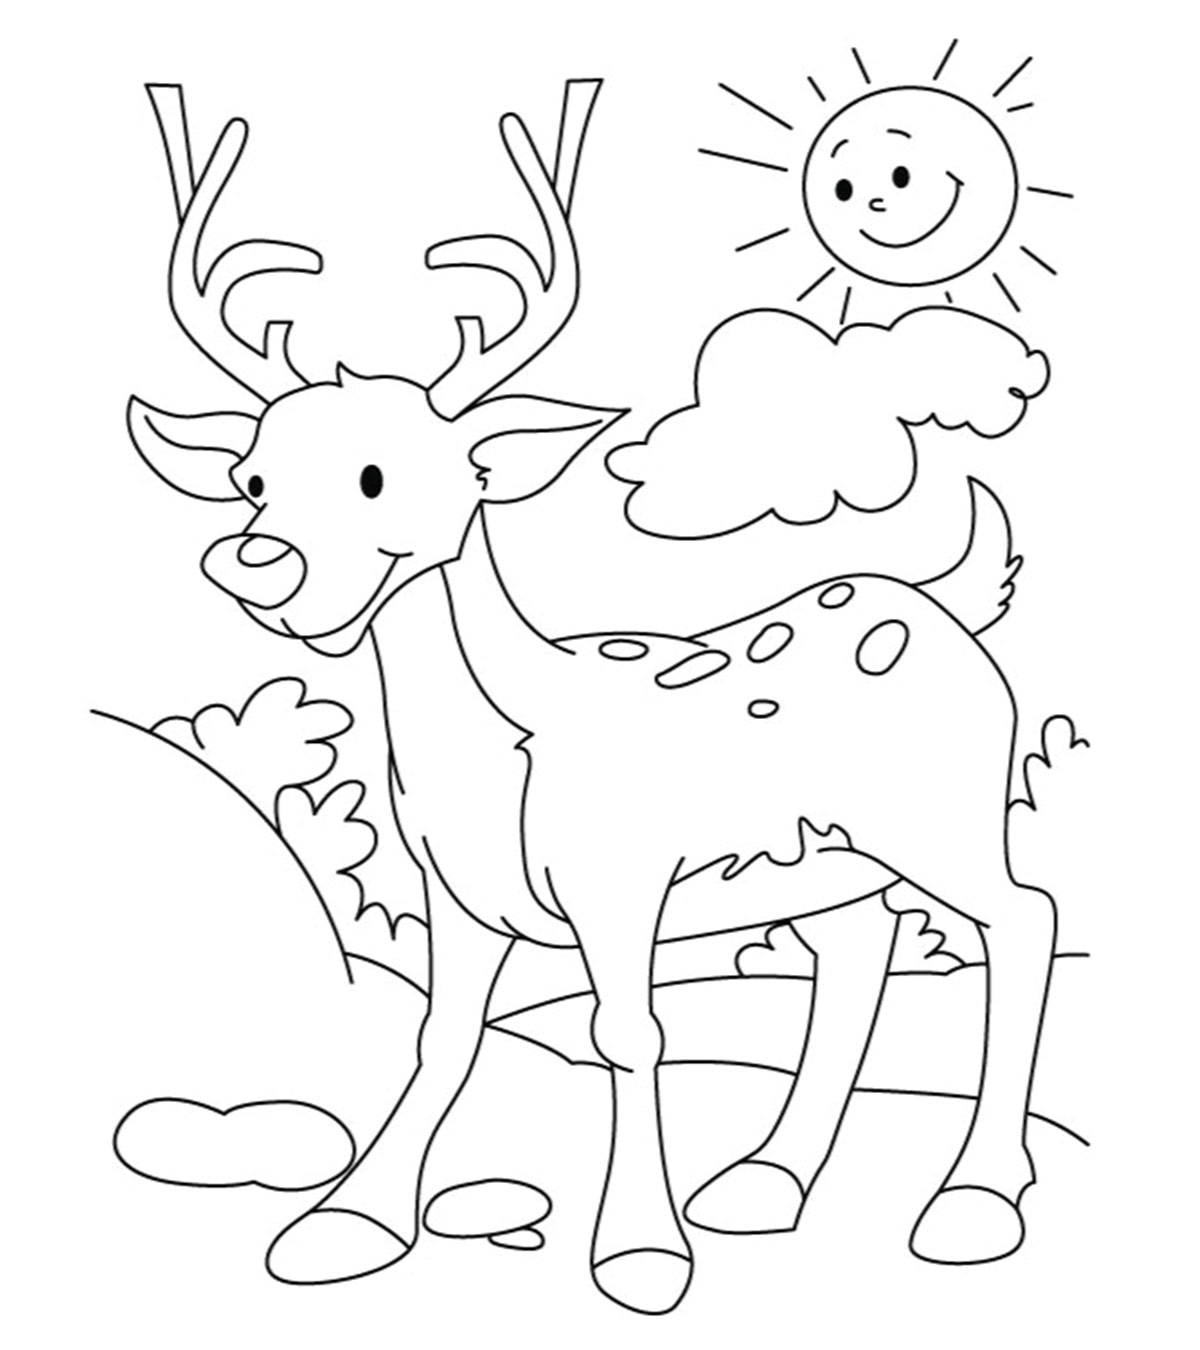 Top 20 Deer Coloring Pages For Your Little Ones_image